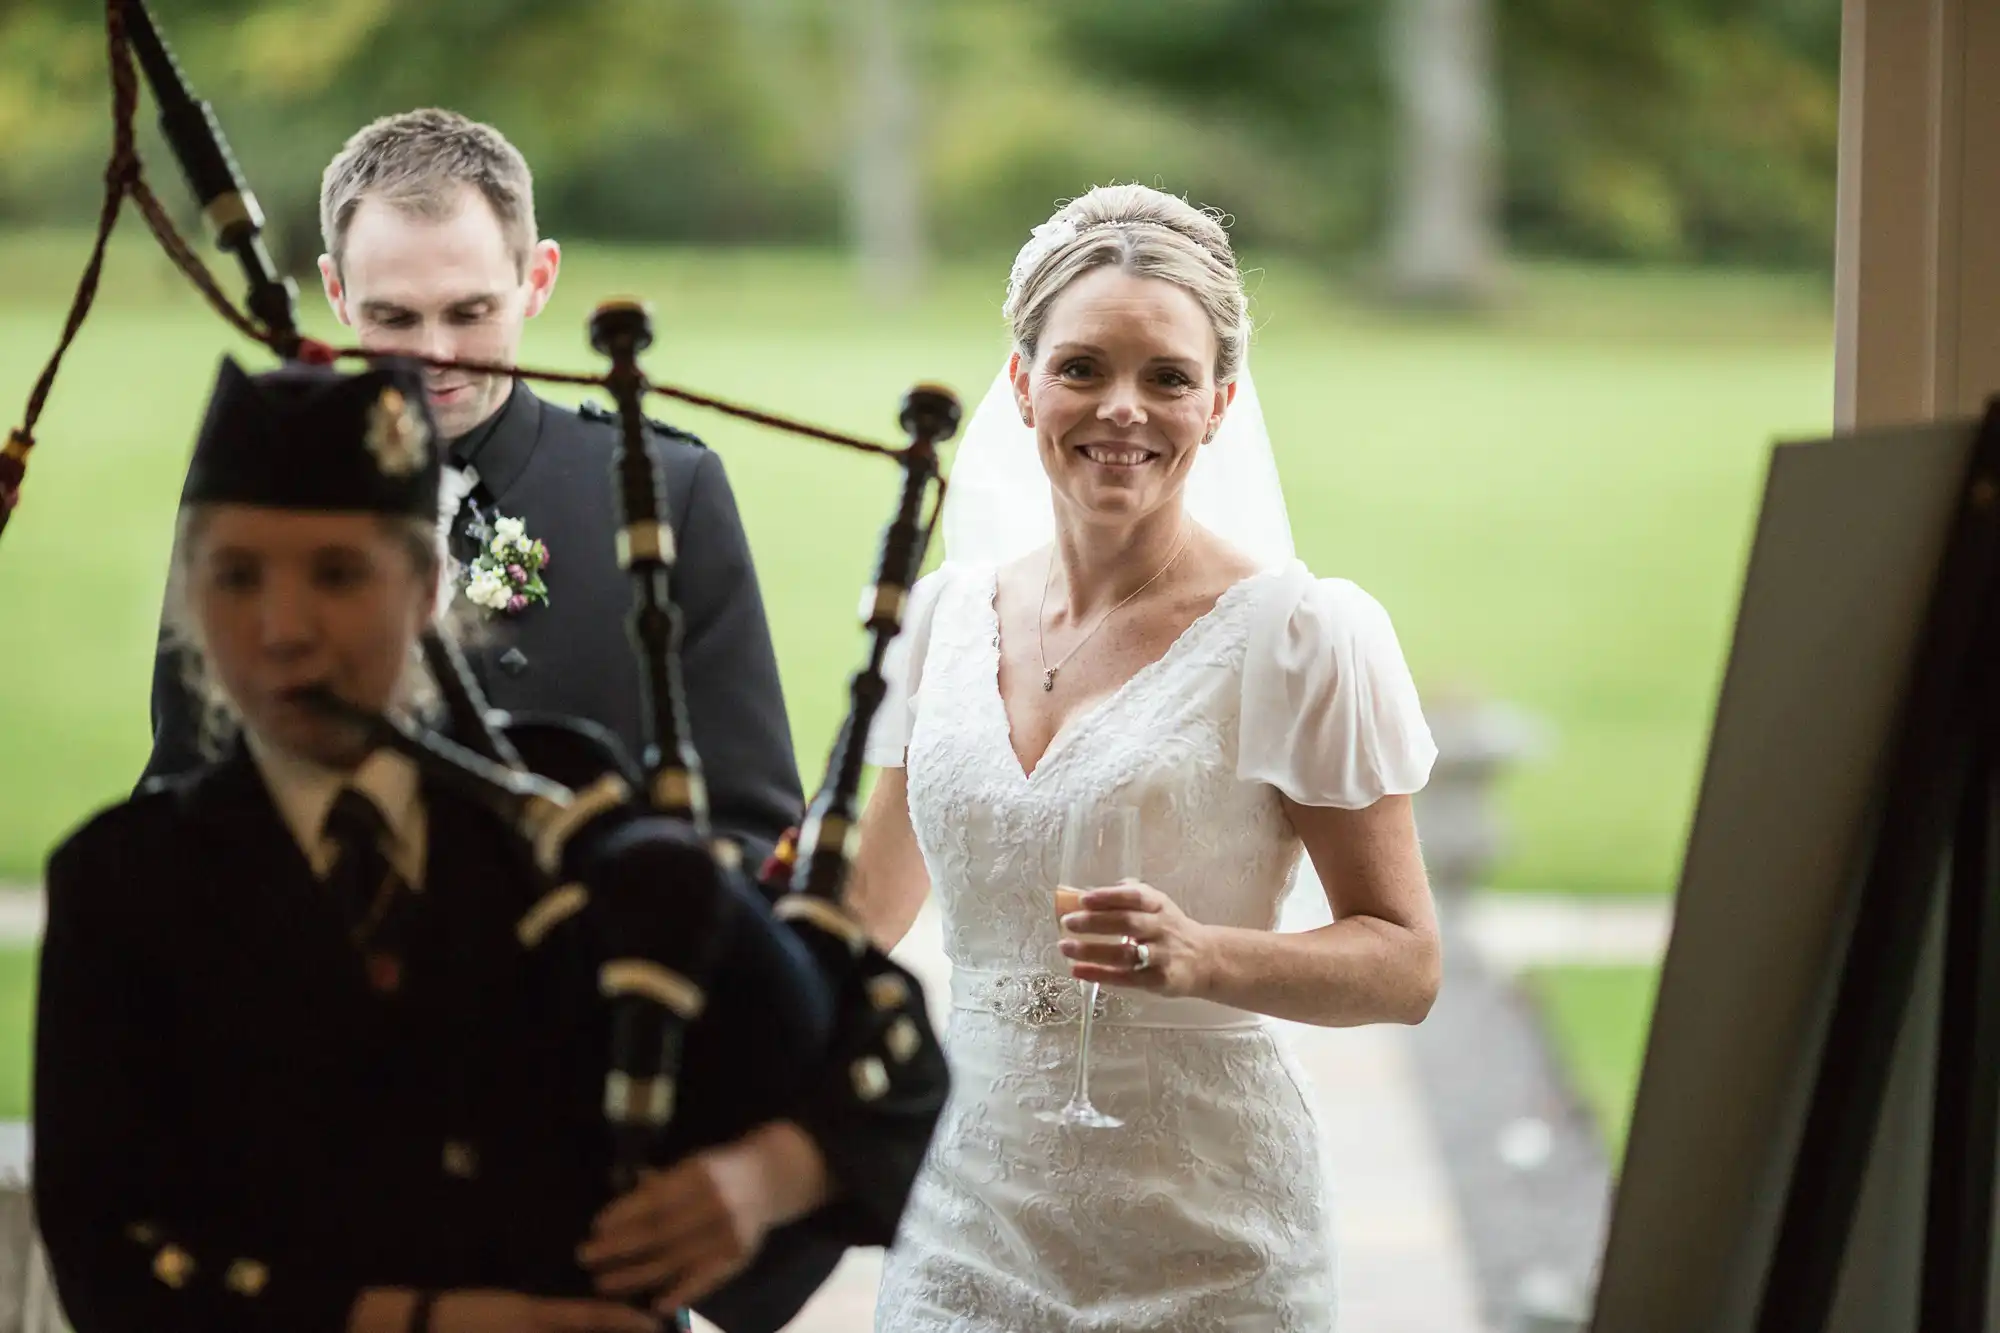 A bride holding a glass smiles as she walks past a bagpiper, with the groom standing in the background.